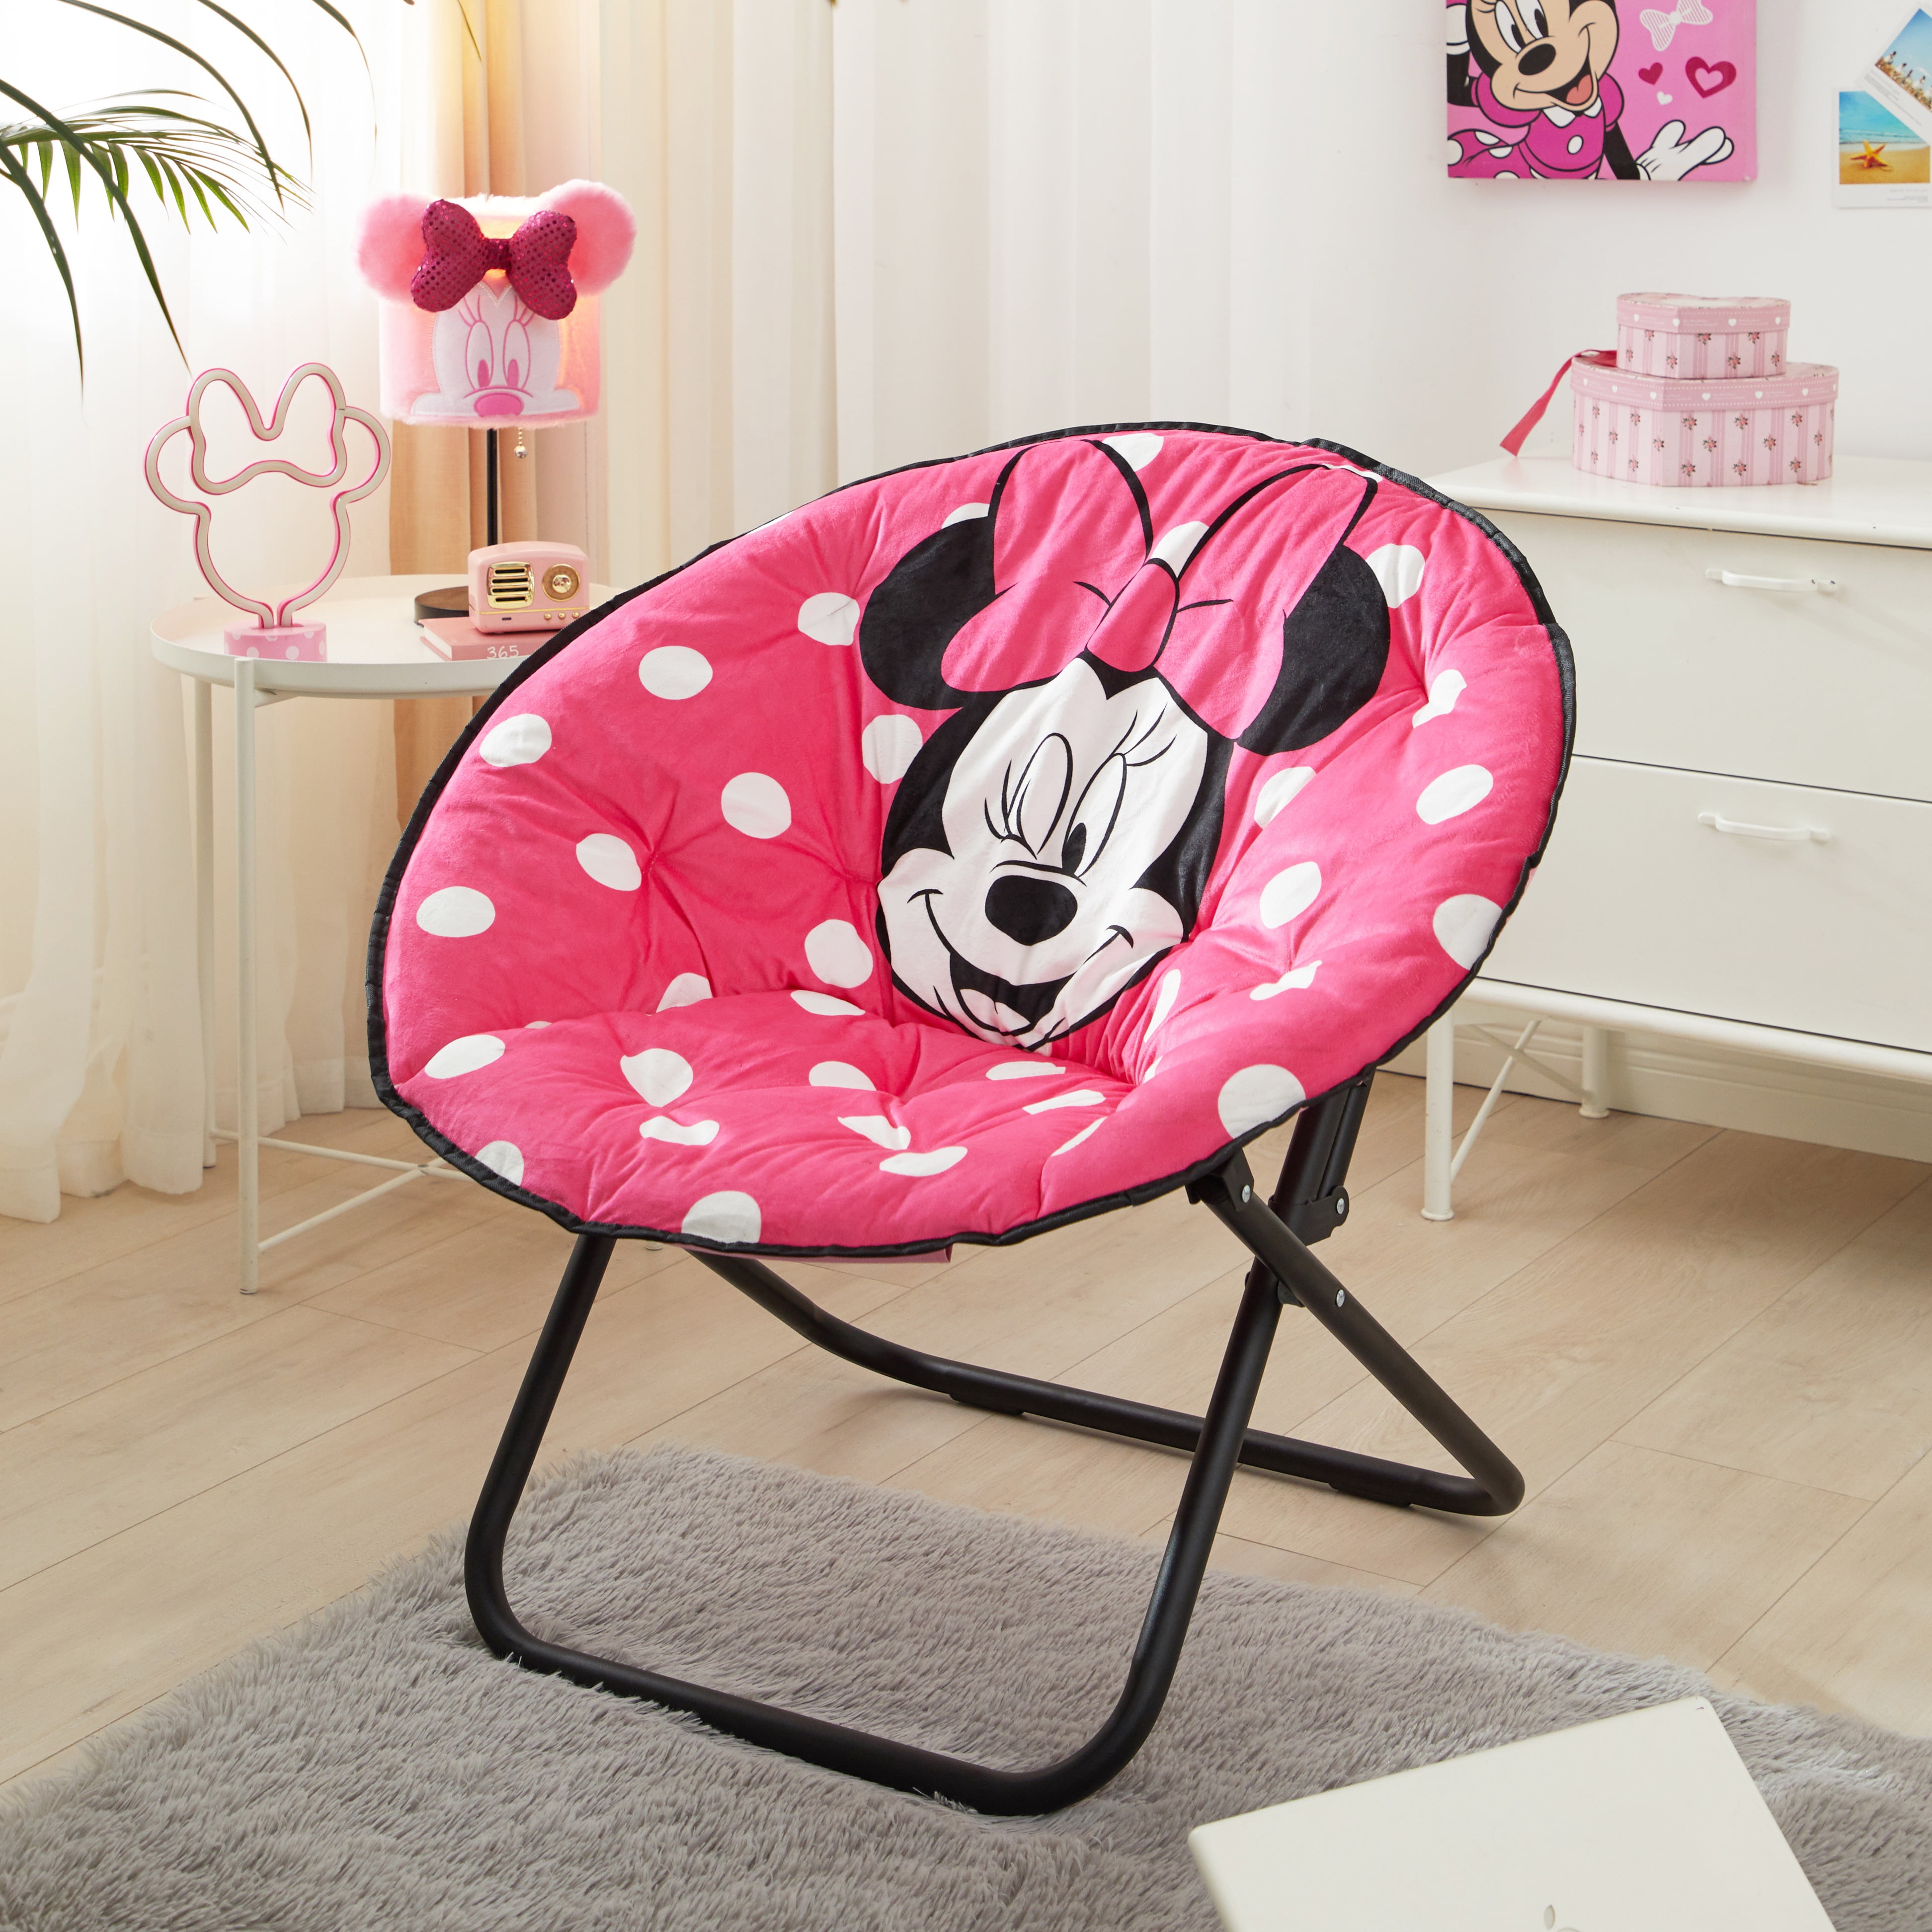 Disney Minnie Mouse Saucer Chair Toddler Kids Portable Seat Sturdy Metal Frame 